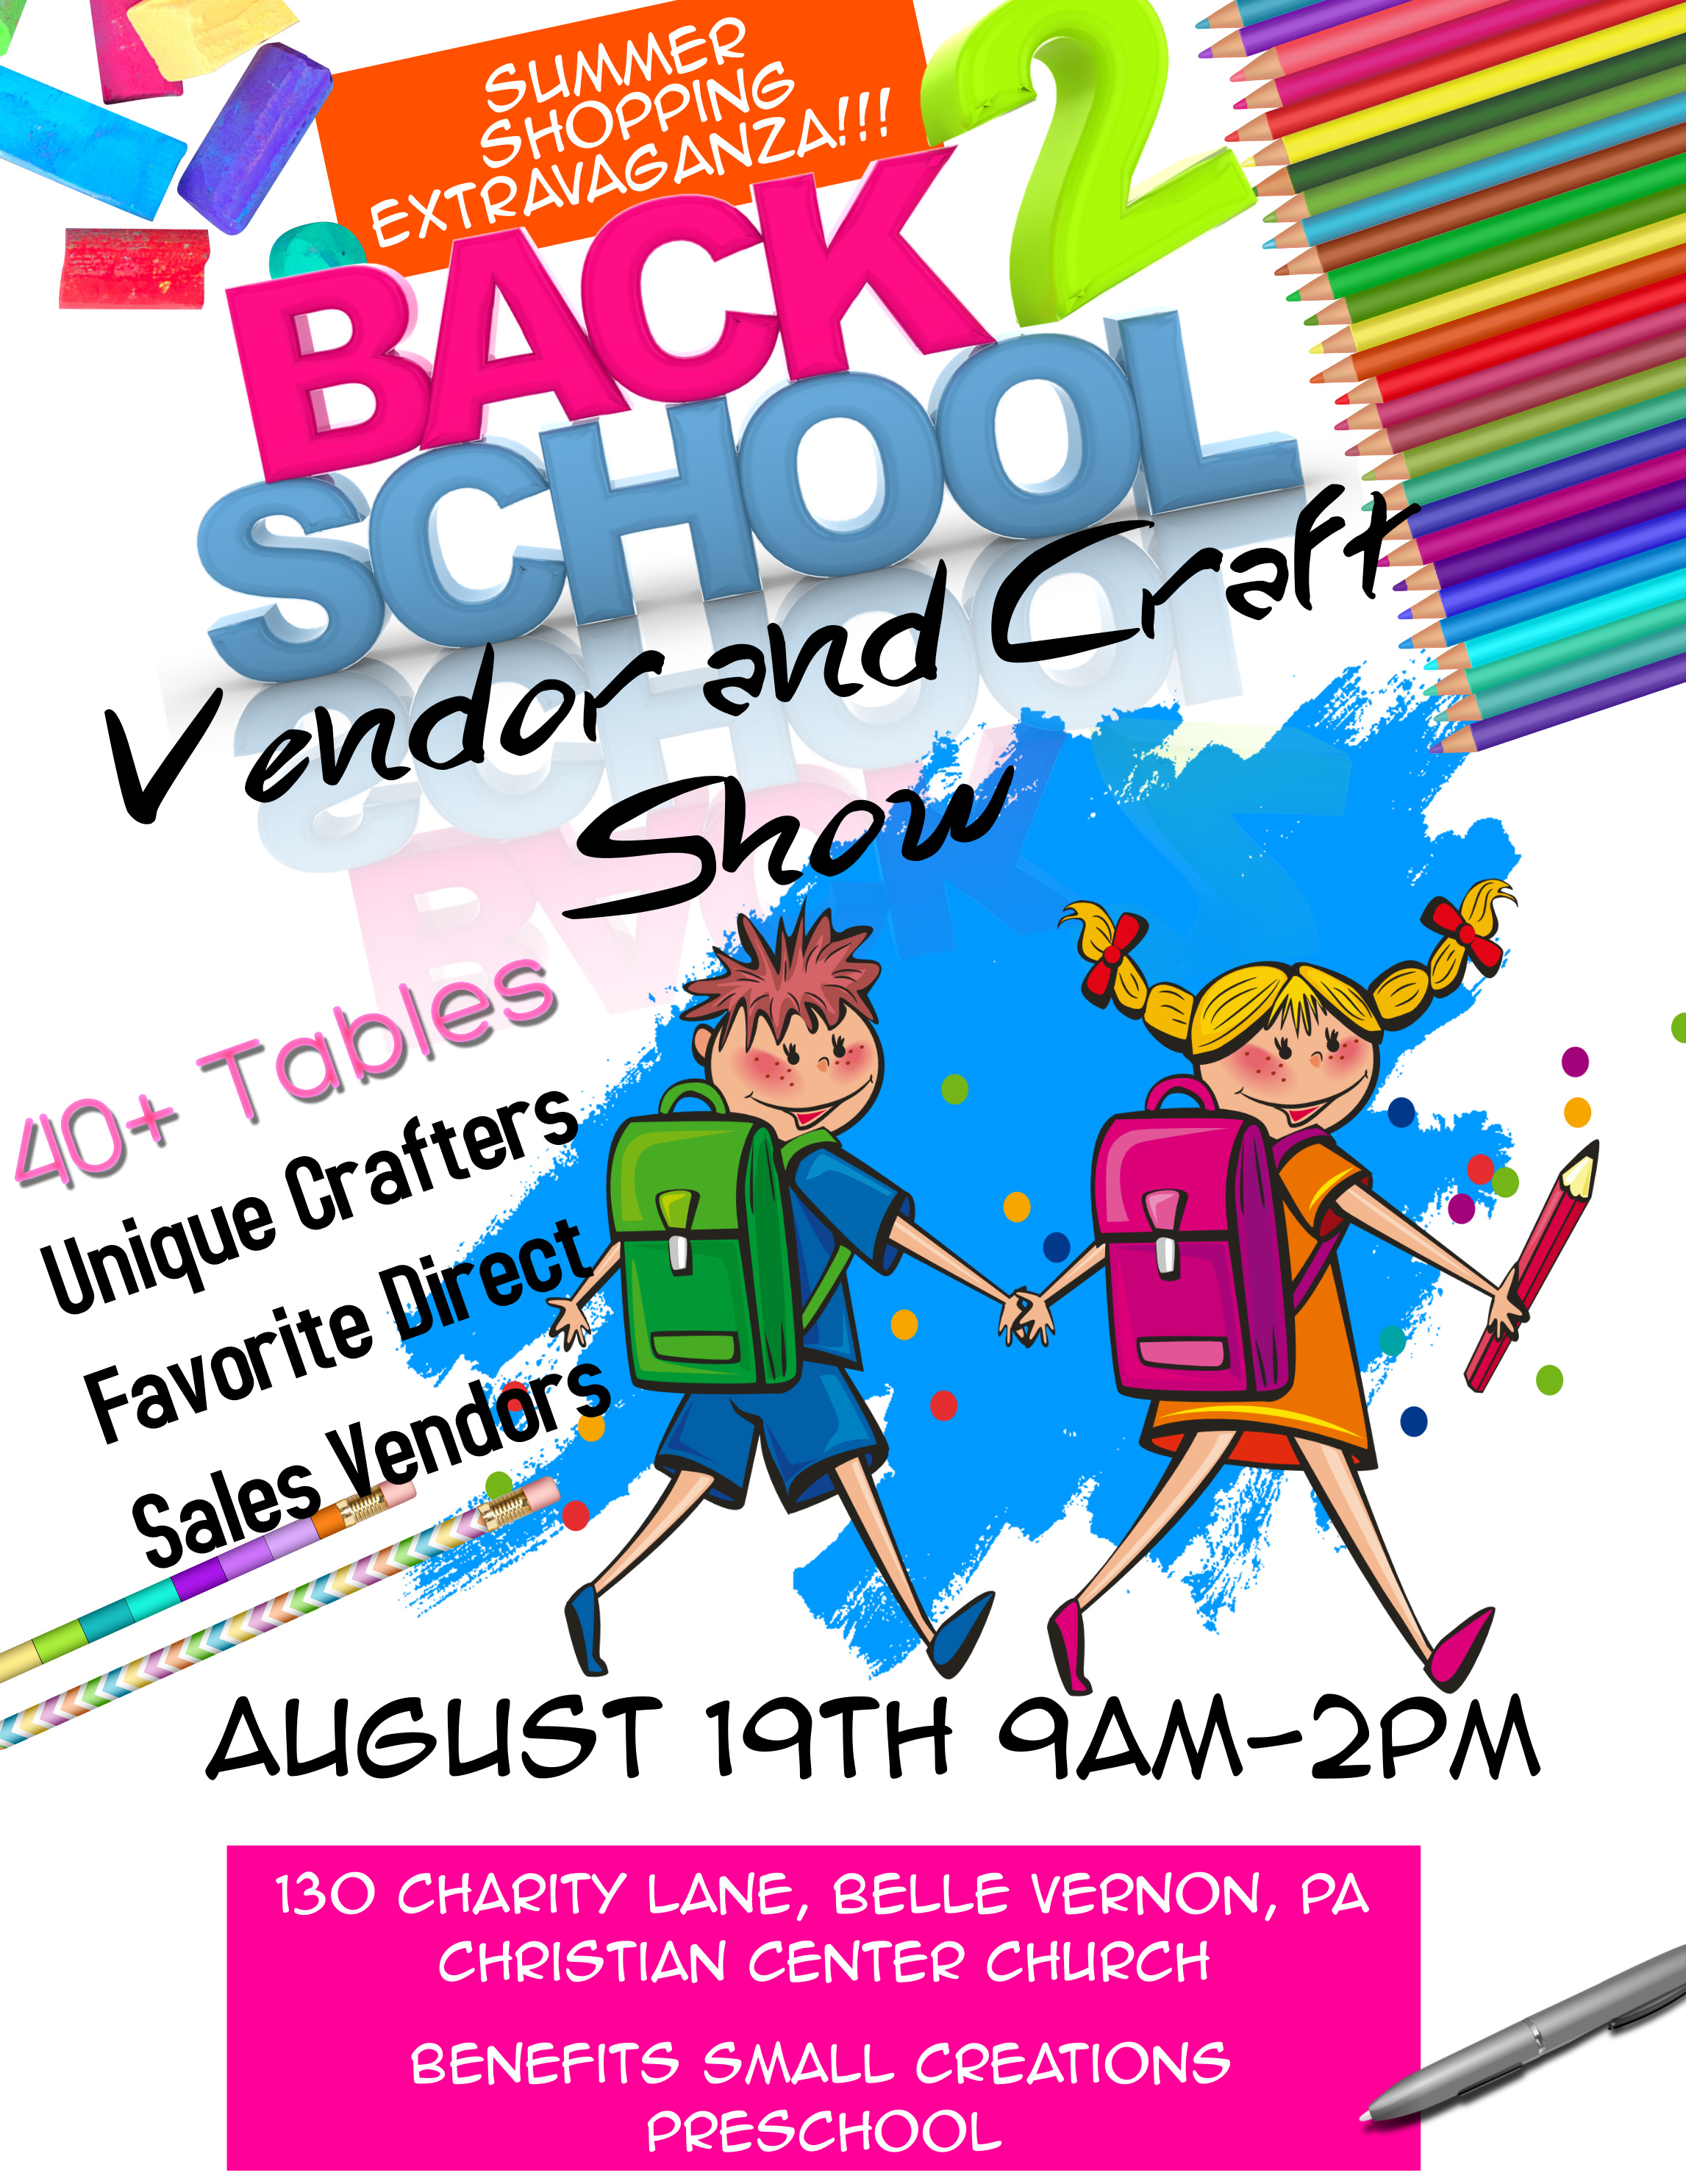 Vender and Craft show